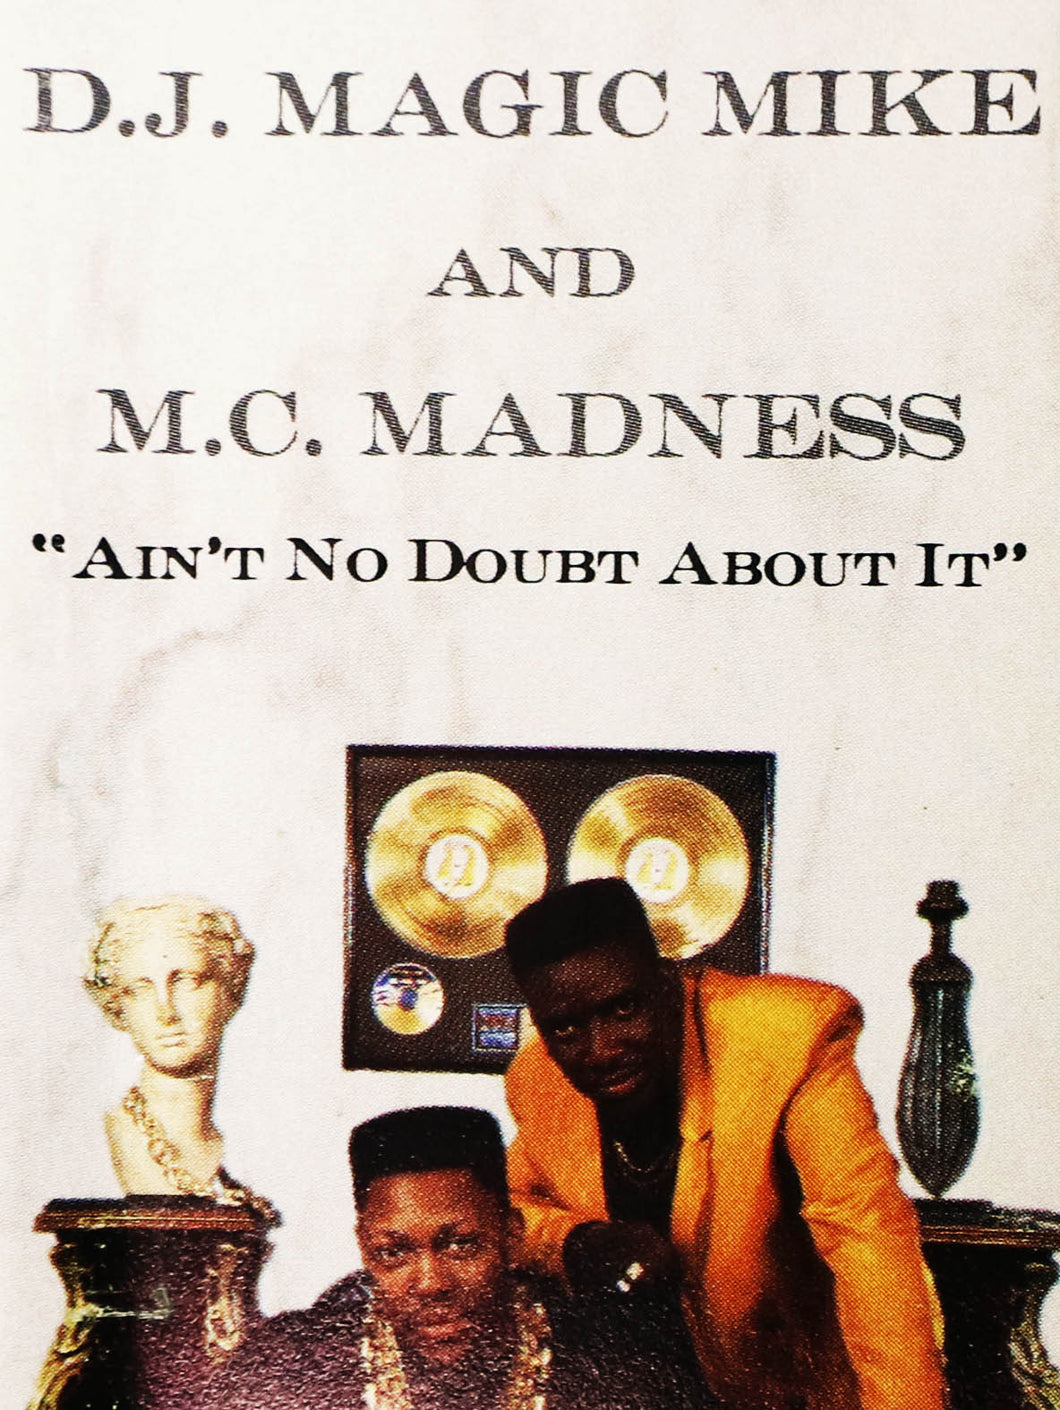 Music Cassette Tape - Hip-Hop / Rap / Bass - DJ Magic Mike And MC Madness - Ain't No Doubt About It -  1991 - Cheetah Records / RM Records - HARD TO FIND